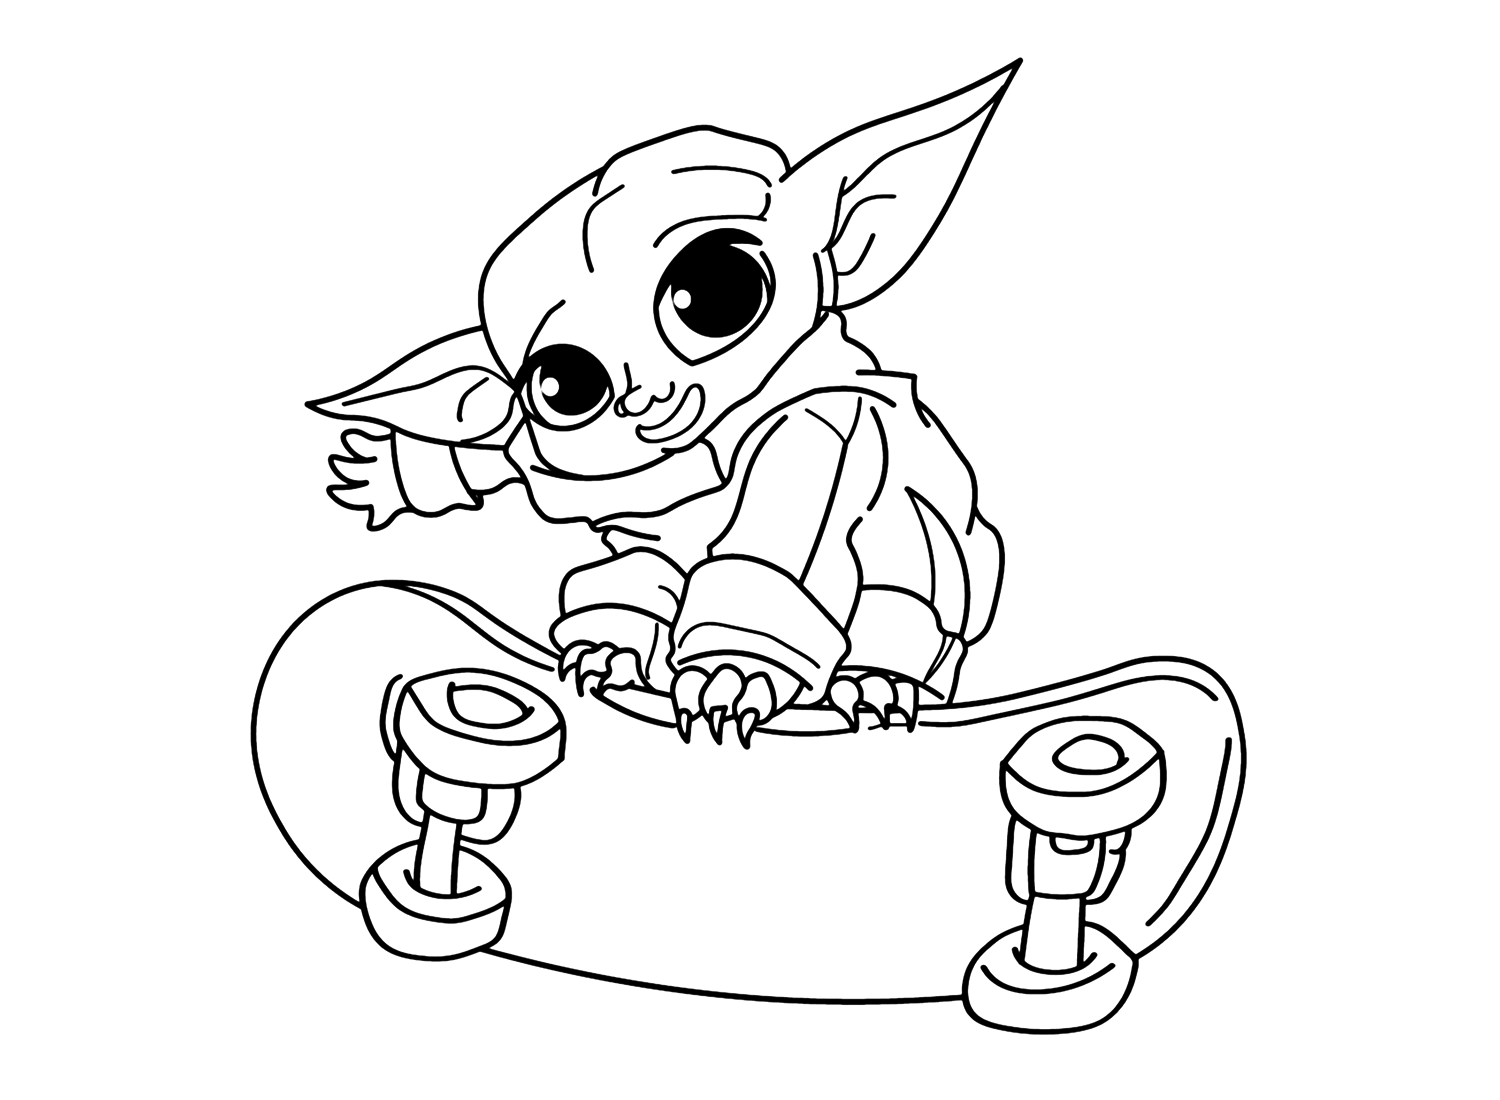 Baby Yoda Image To Color